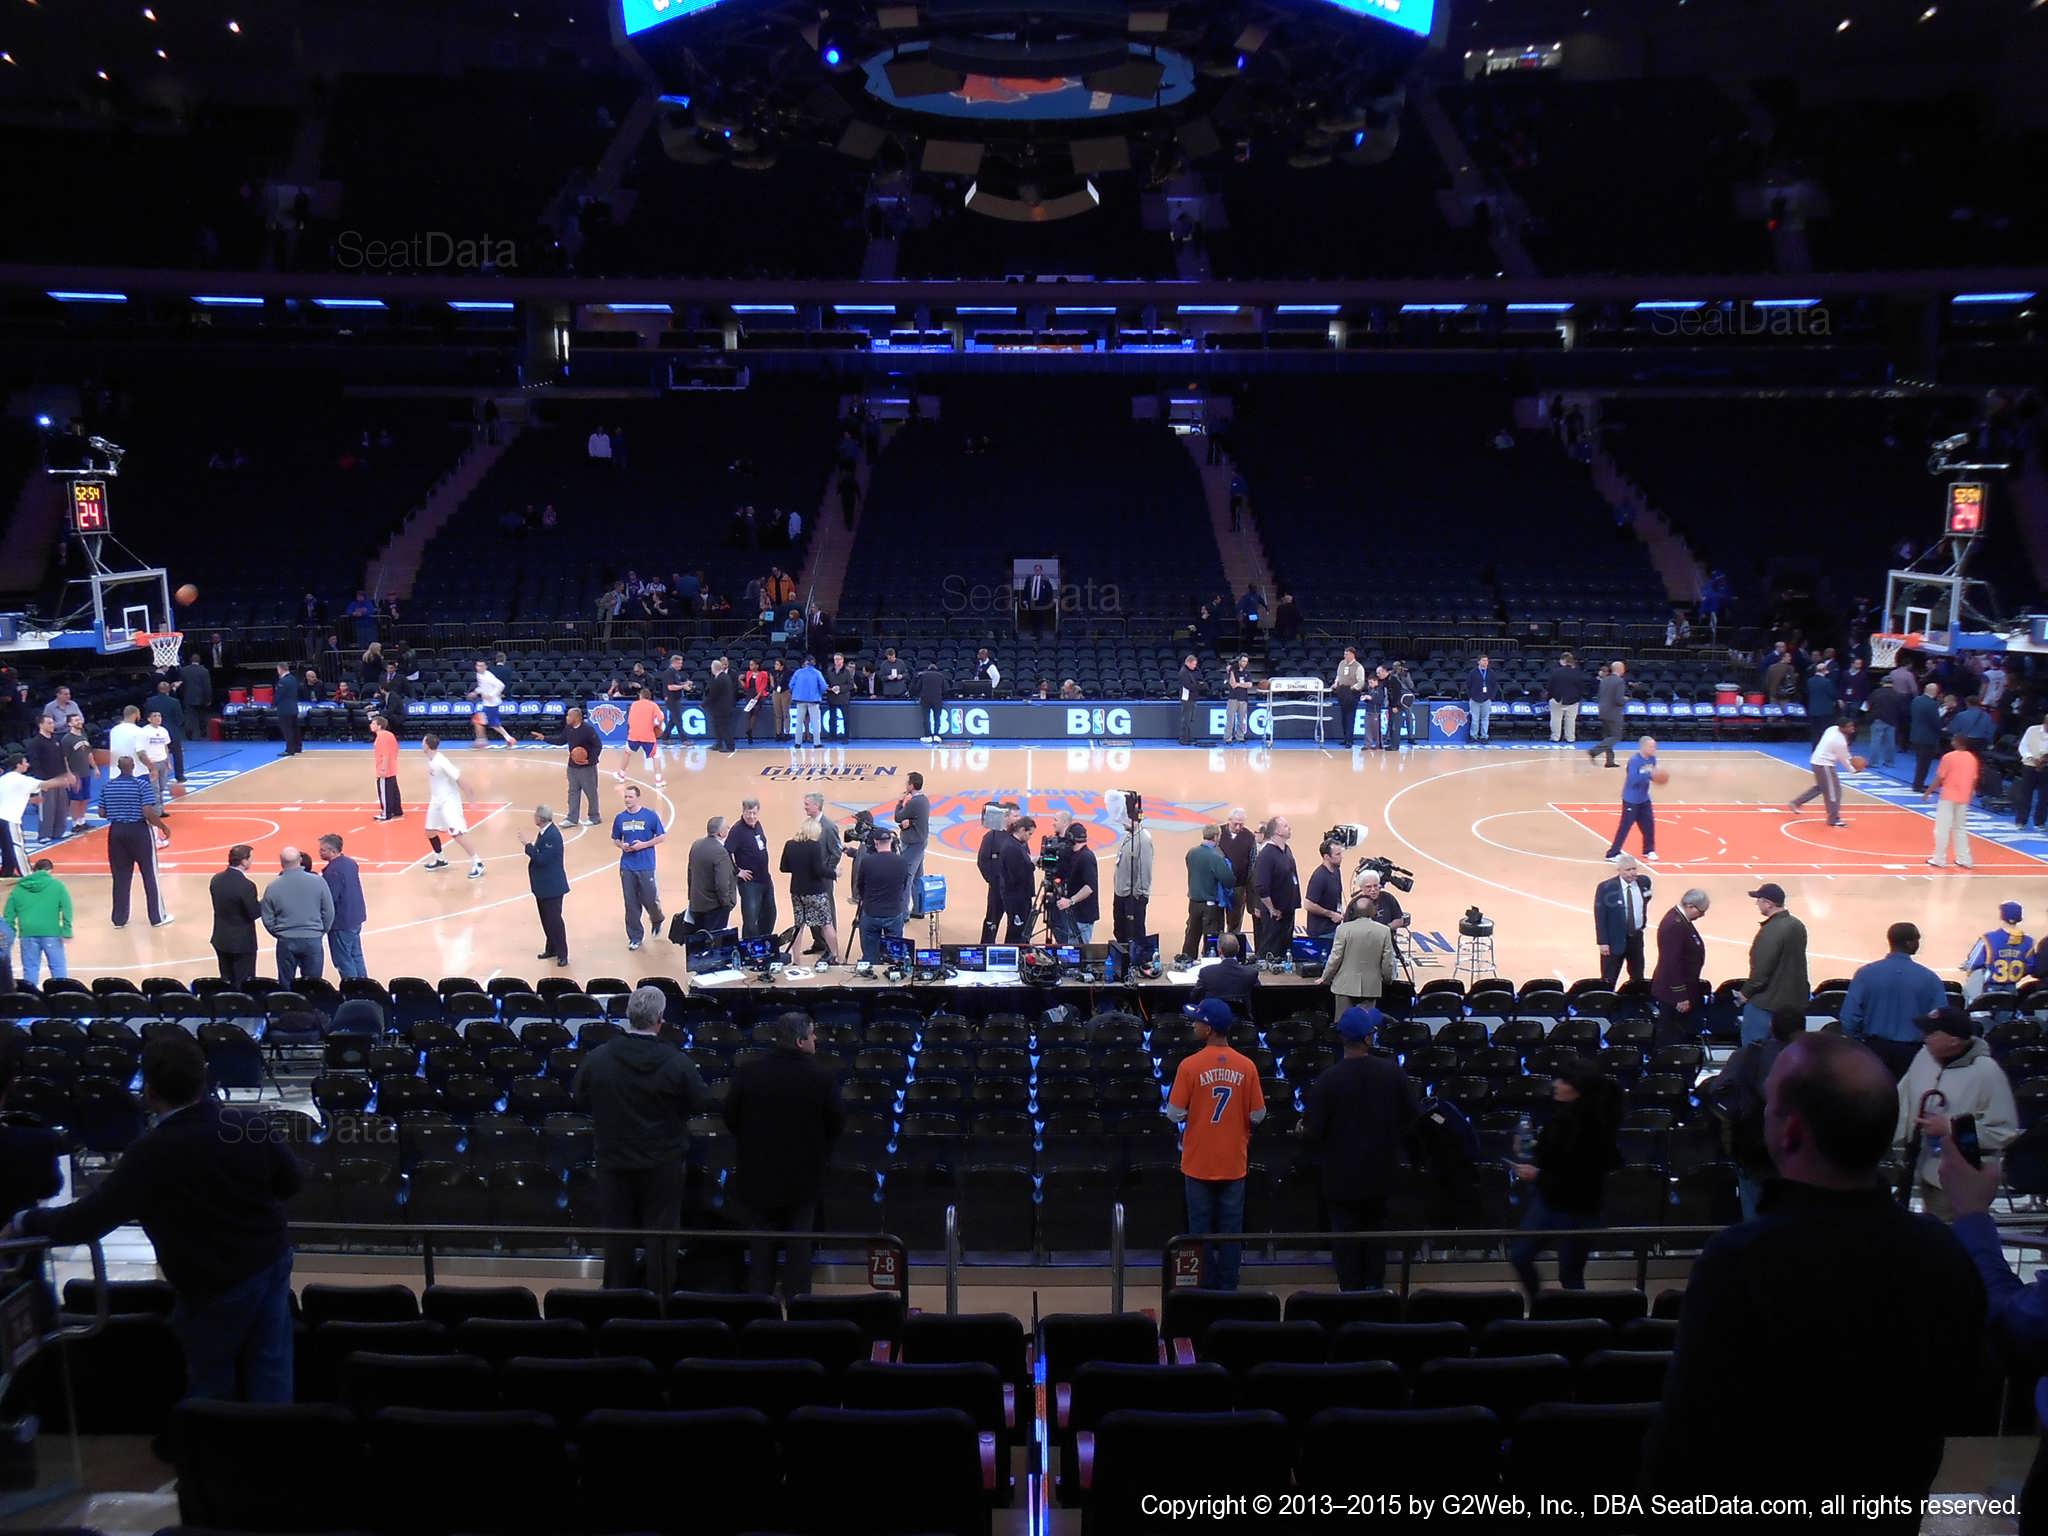 Seat view from section 117 at Madison Square Garden, home of the New York Knicks.